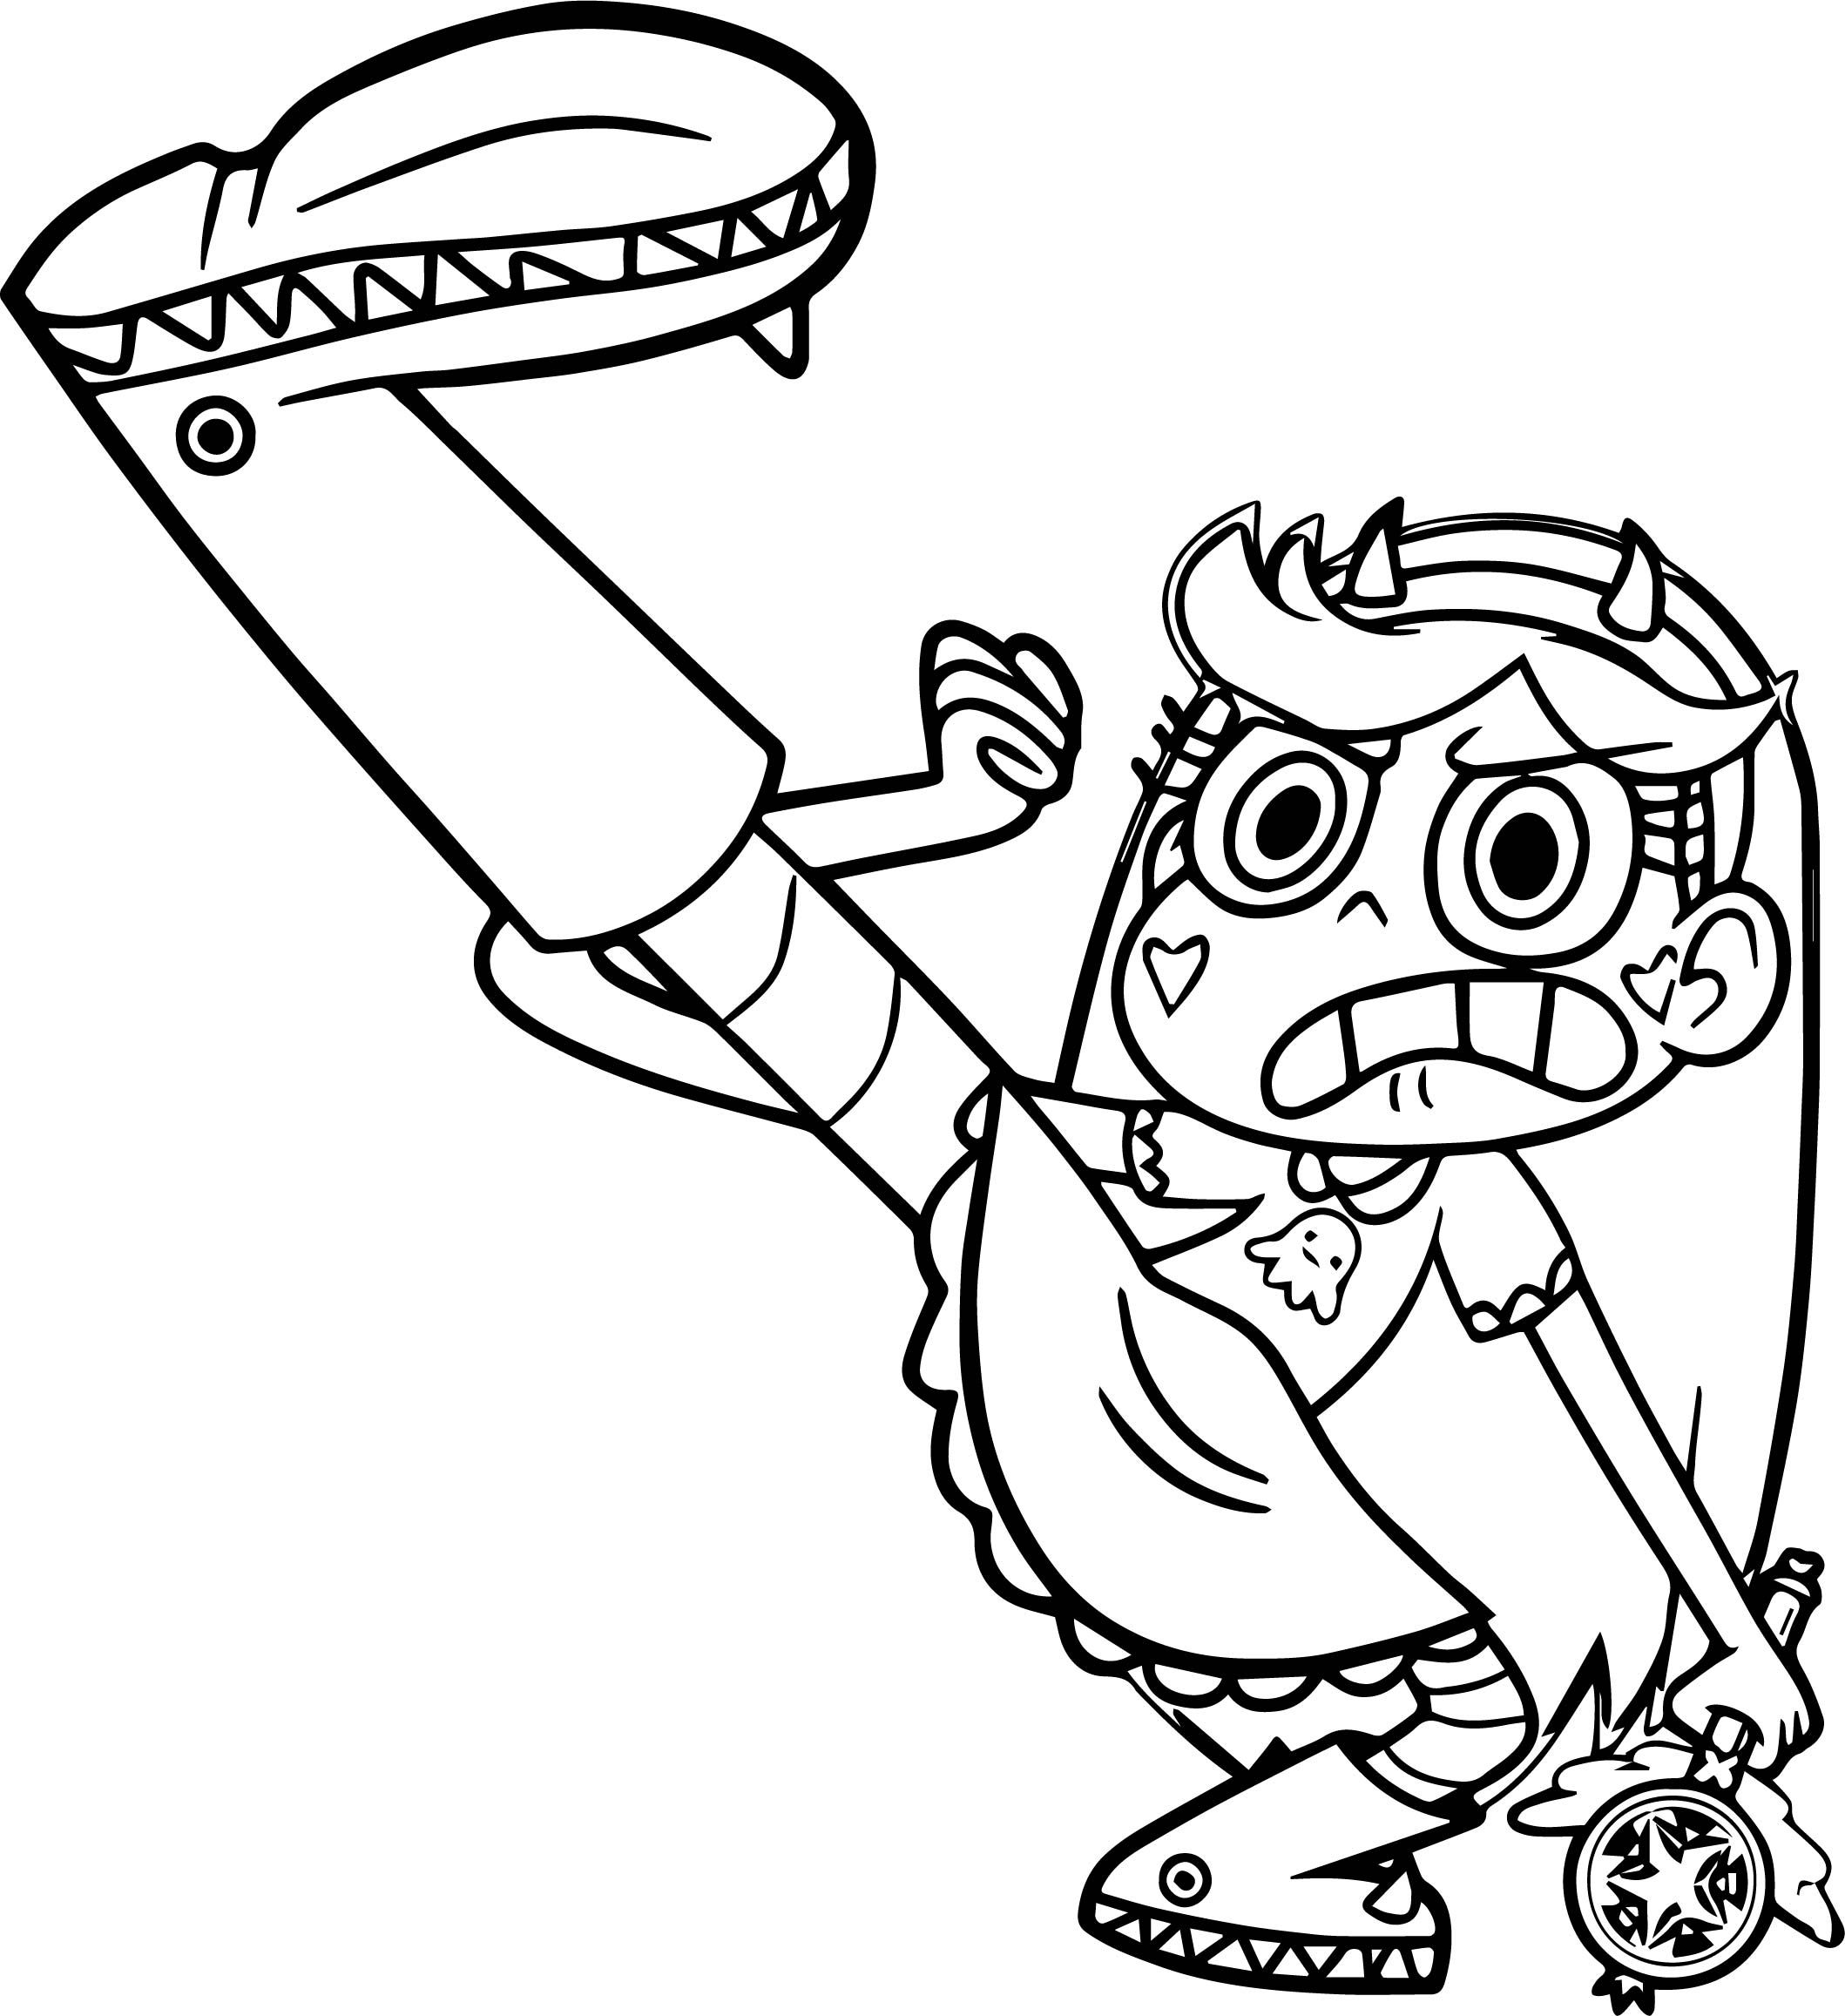 Star Vs The Forces Of Evil 10 For Kids Coloring Page